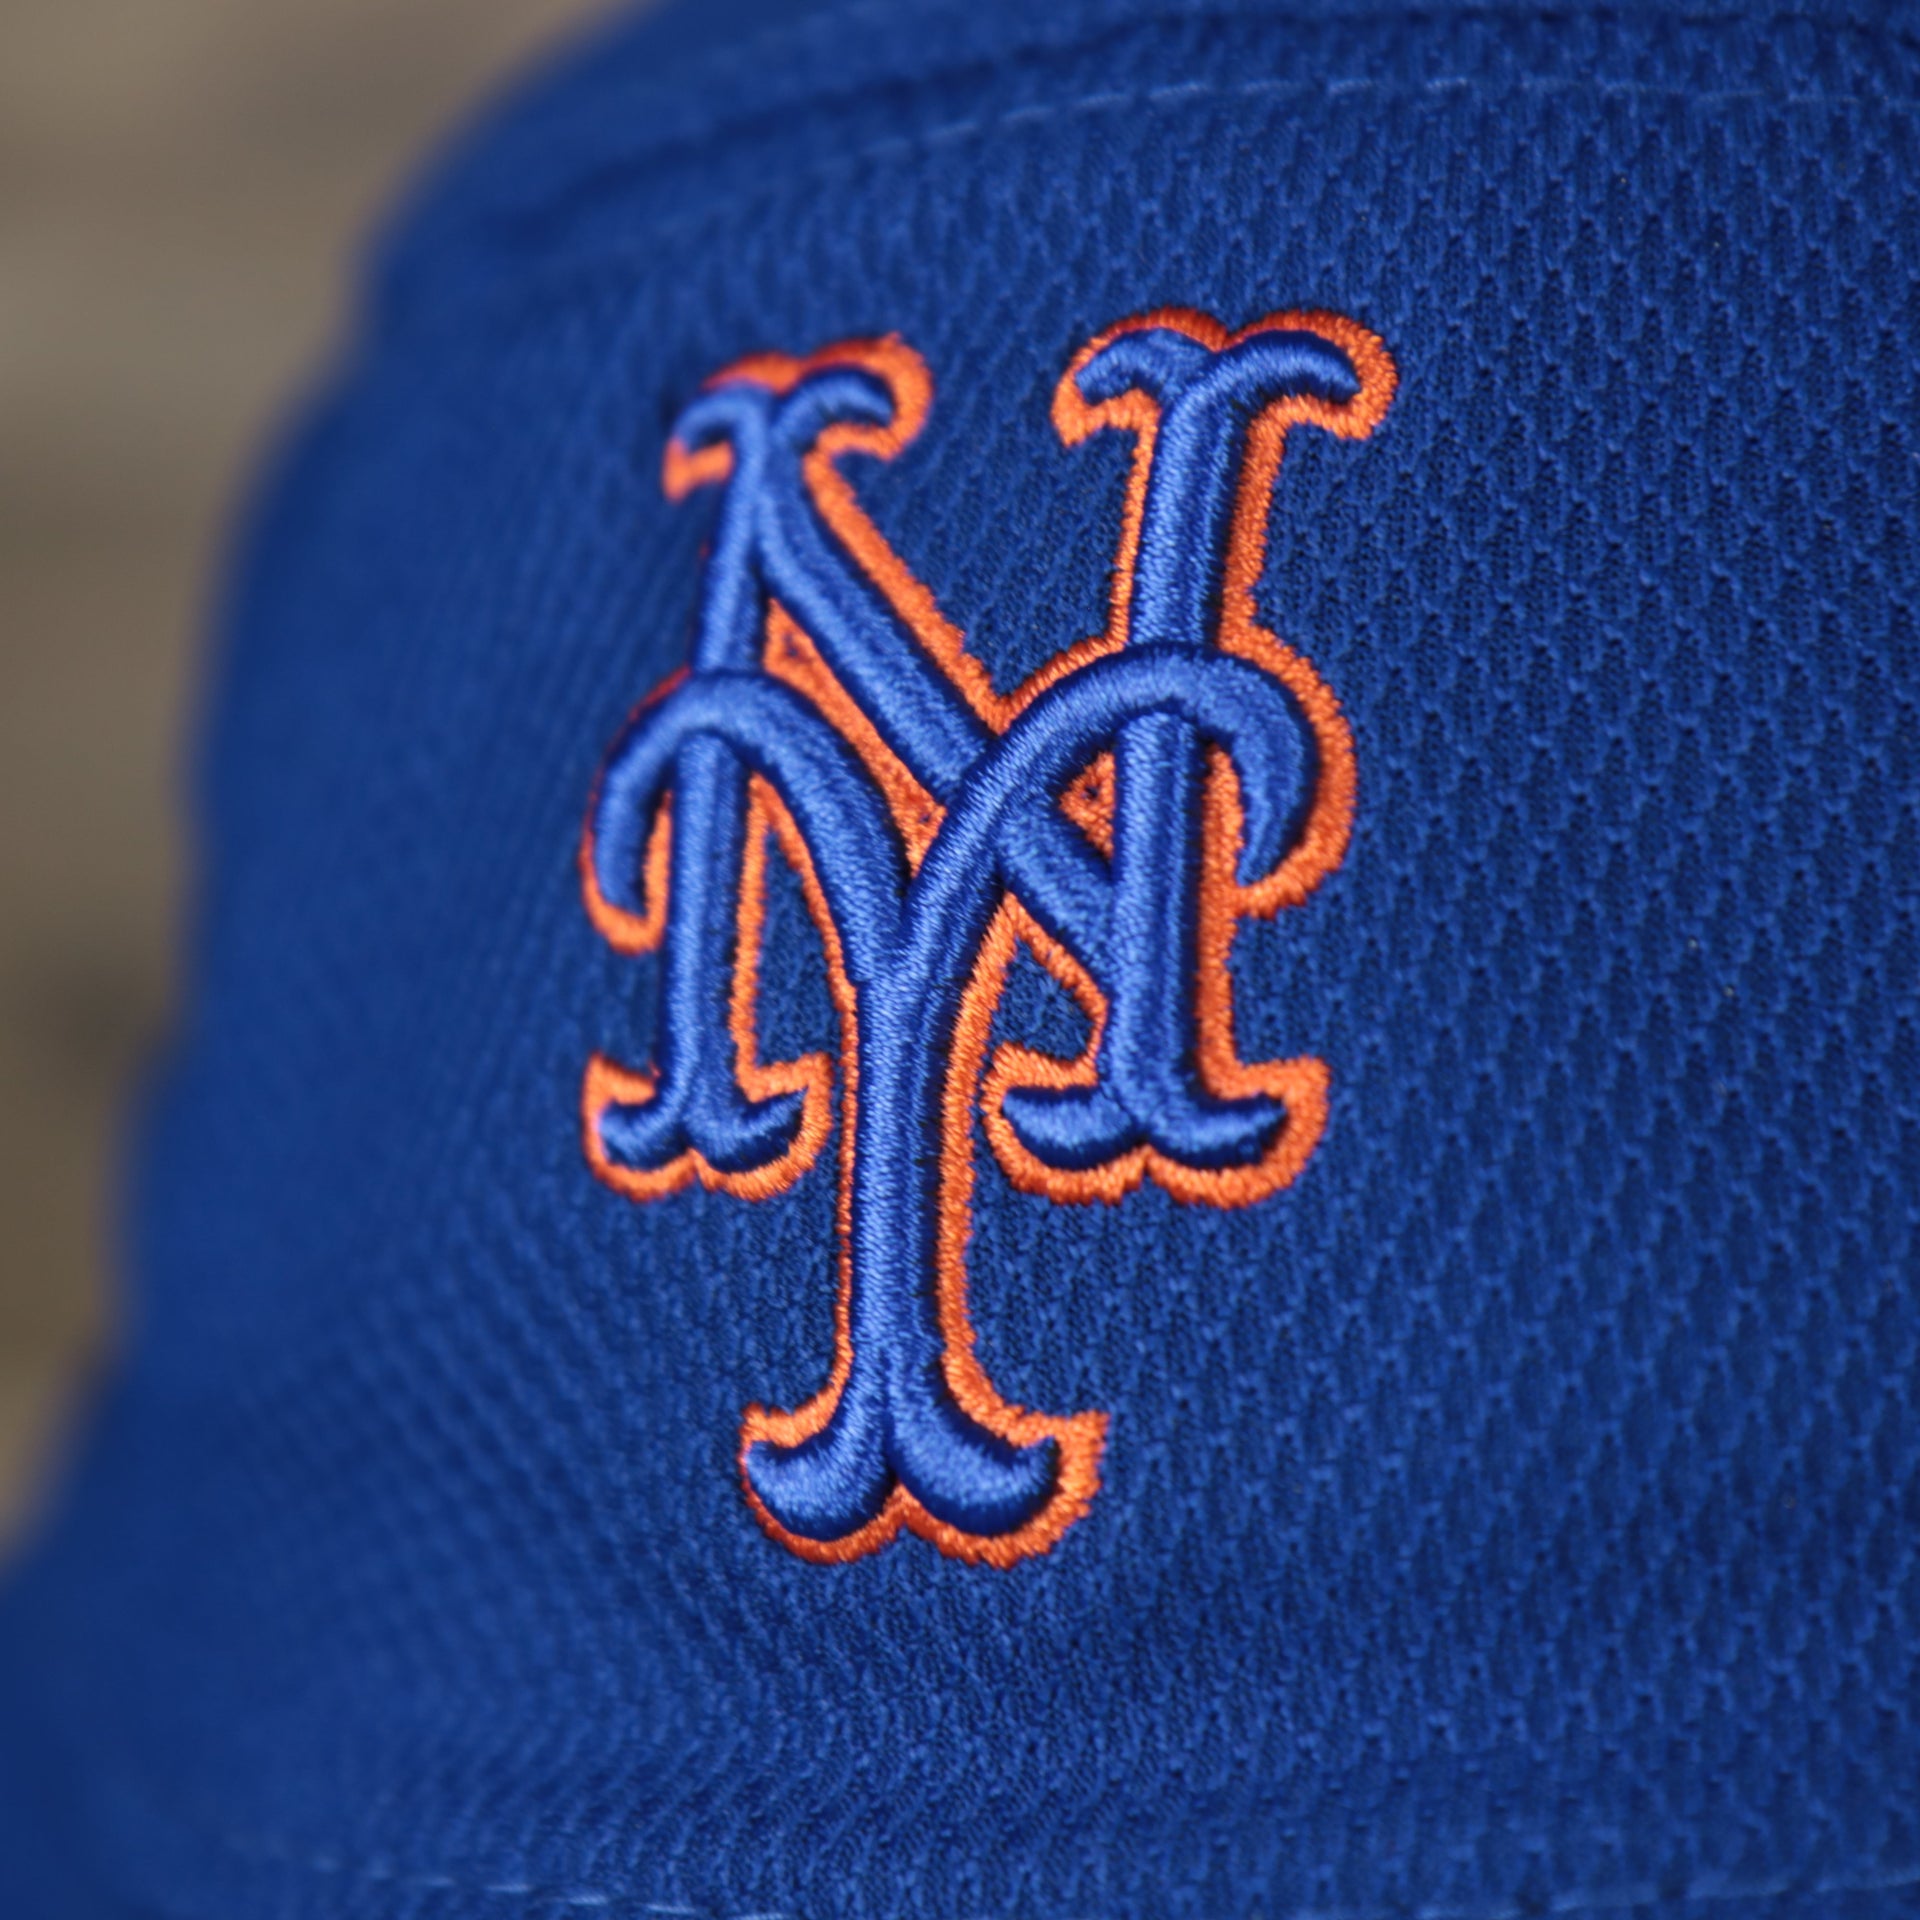 A close up of the Mets logo on the New York Mets  MLB 2022 Spring Training Onfield Bucket Hat